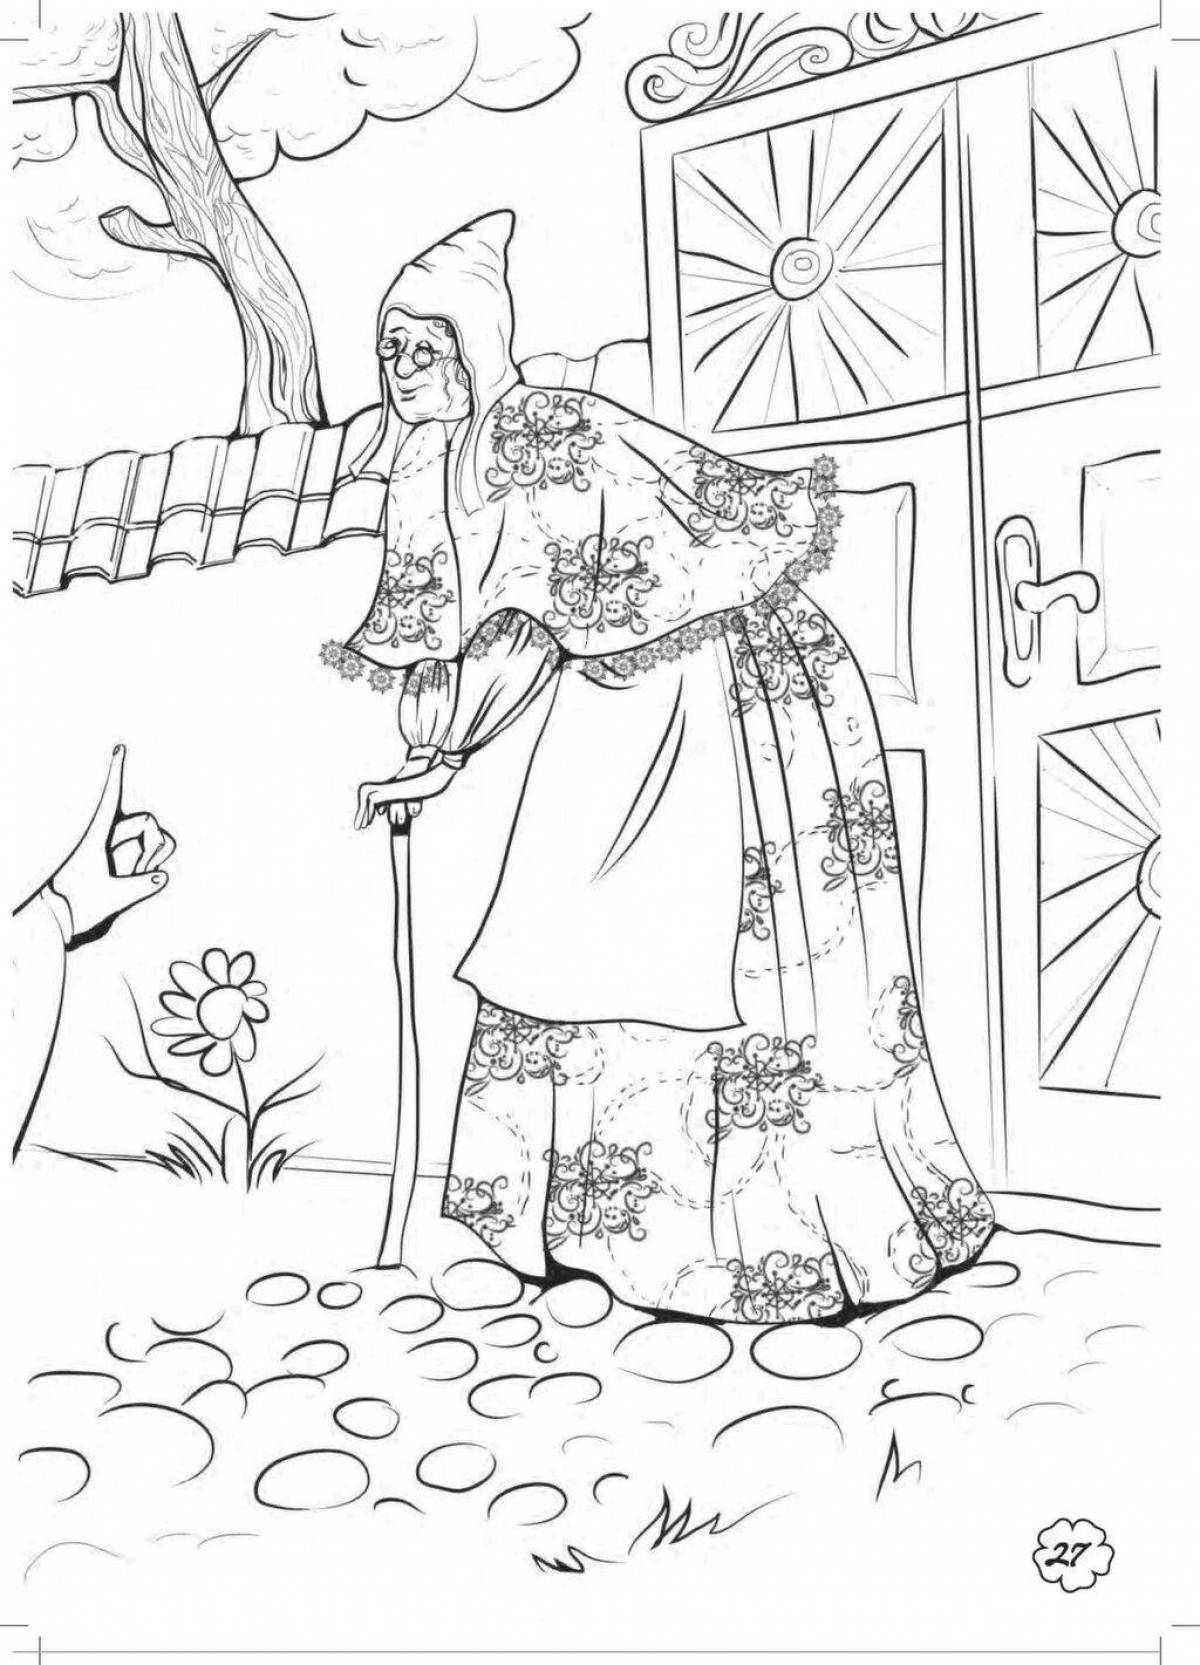 Charming hostess blizzard coloring page